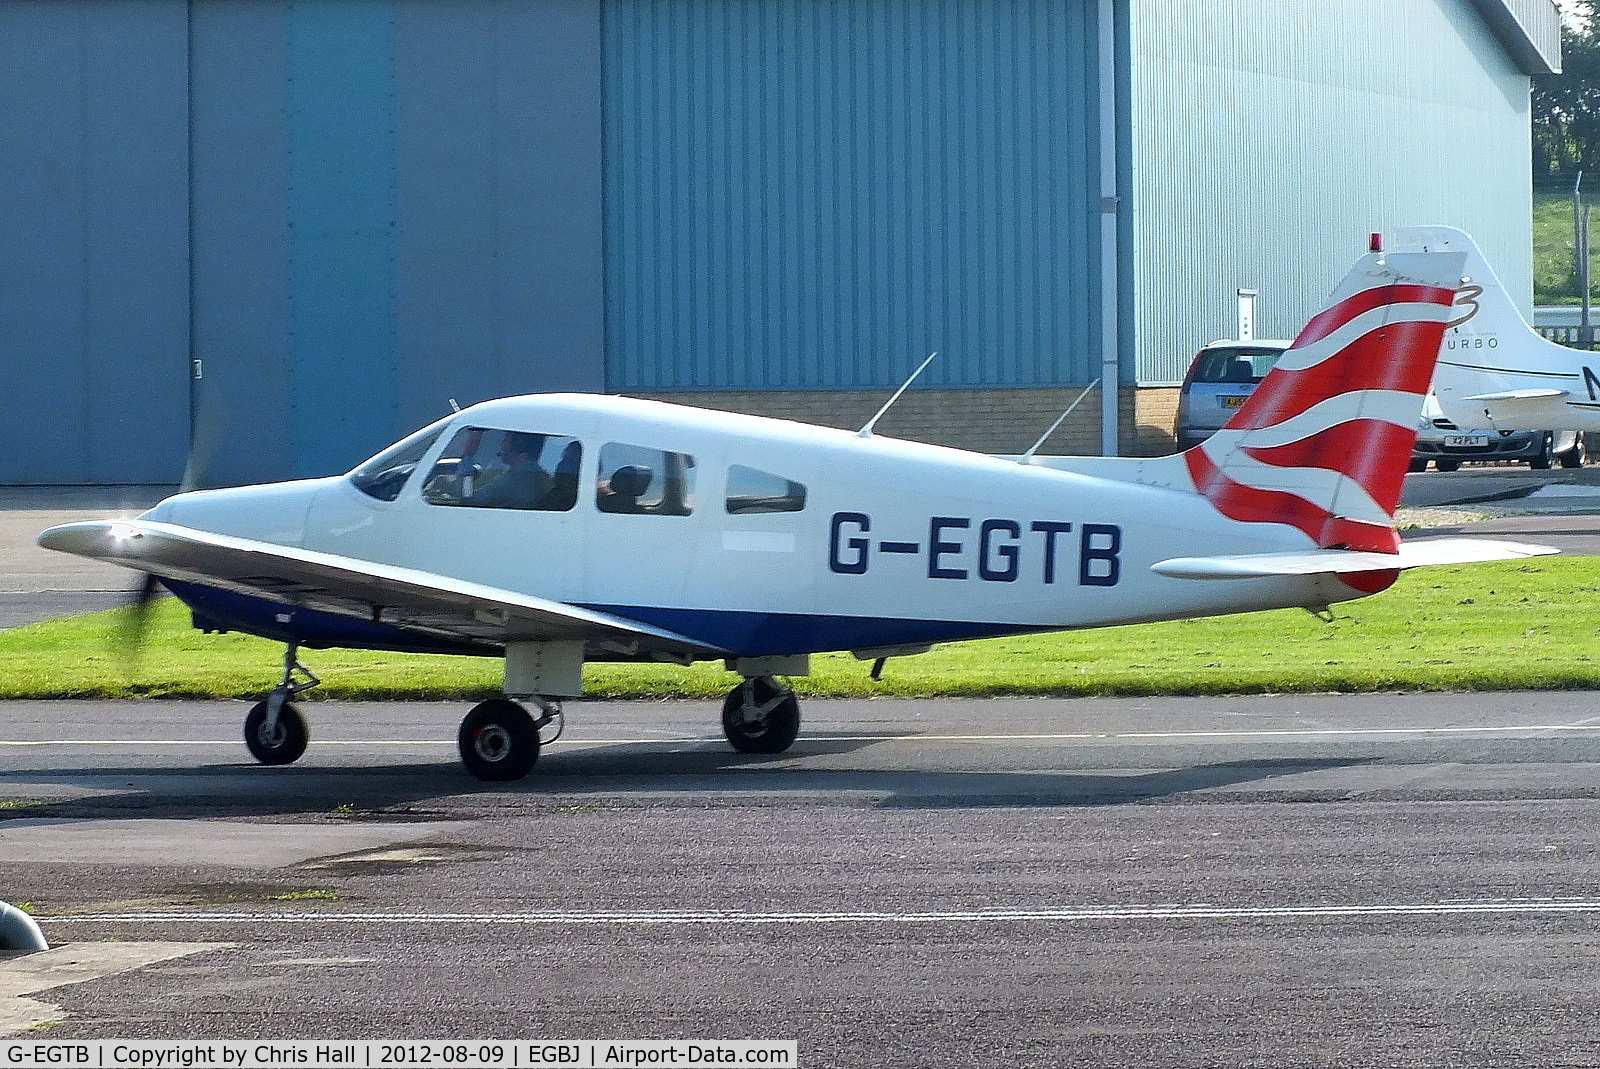 G-EGTB, 1978 Piper PA-28-161 Cherokee Warrior II C/N 28-7816074, ex Airways Flying Club, now operated by Aviation advice and consultancy Ltd